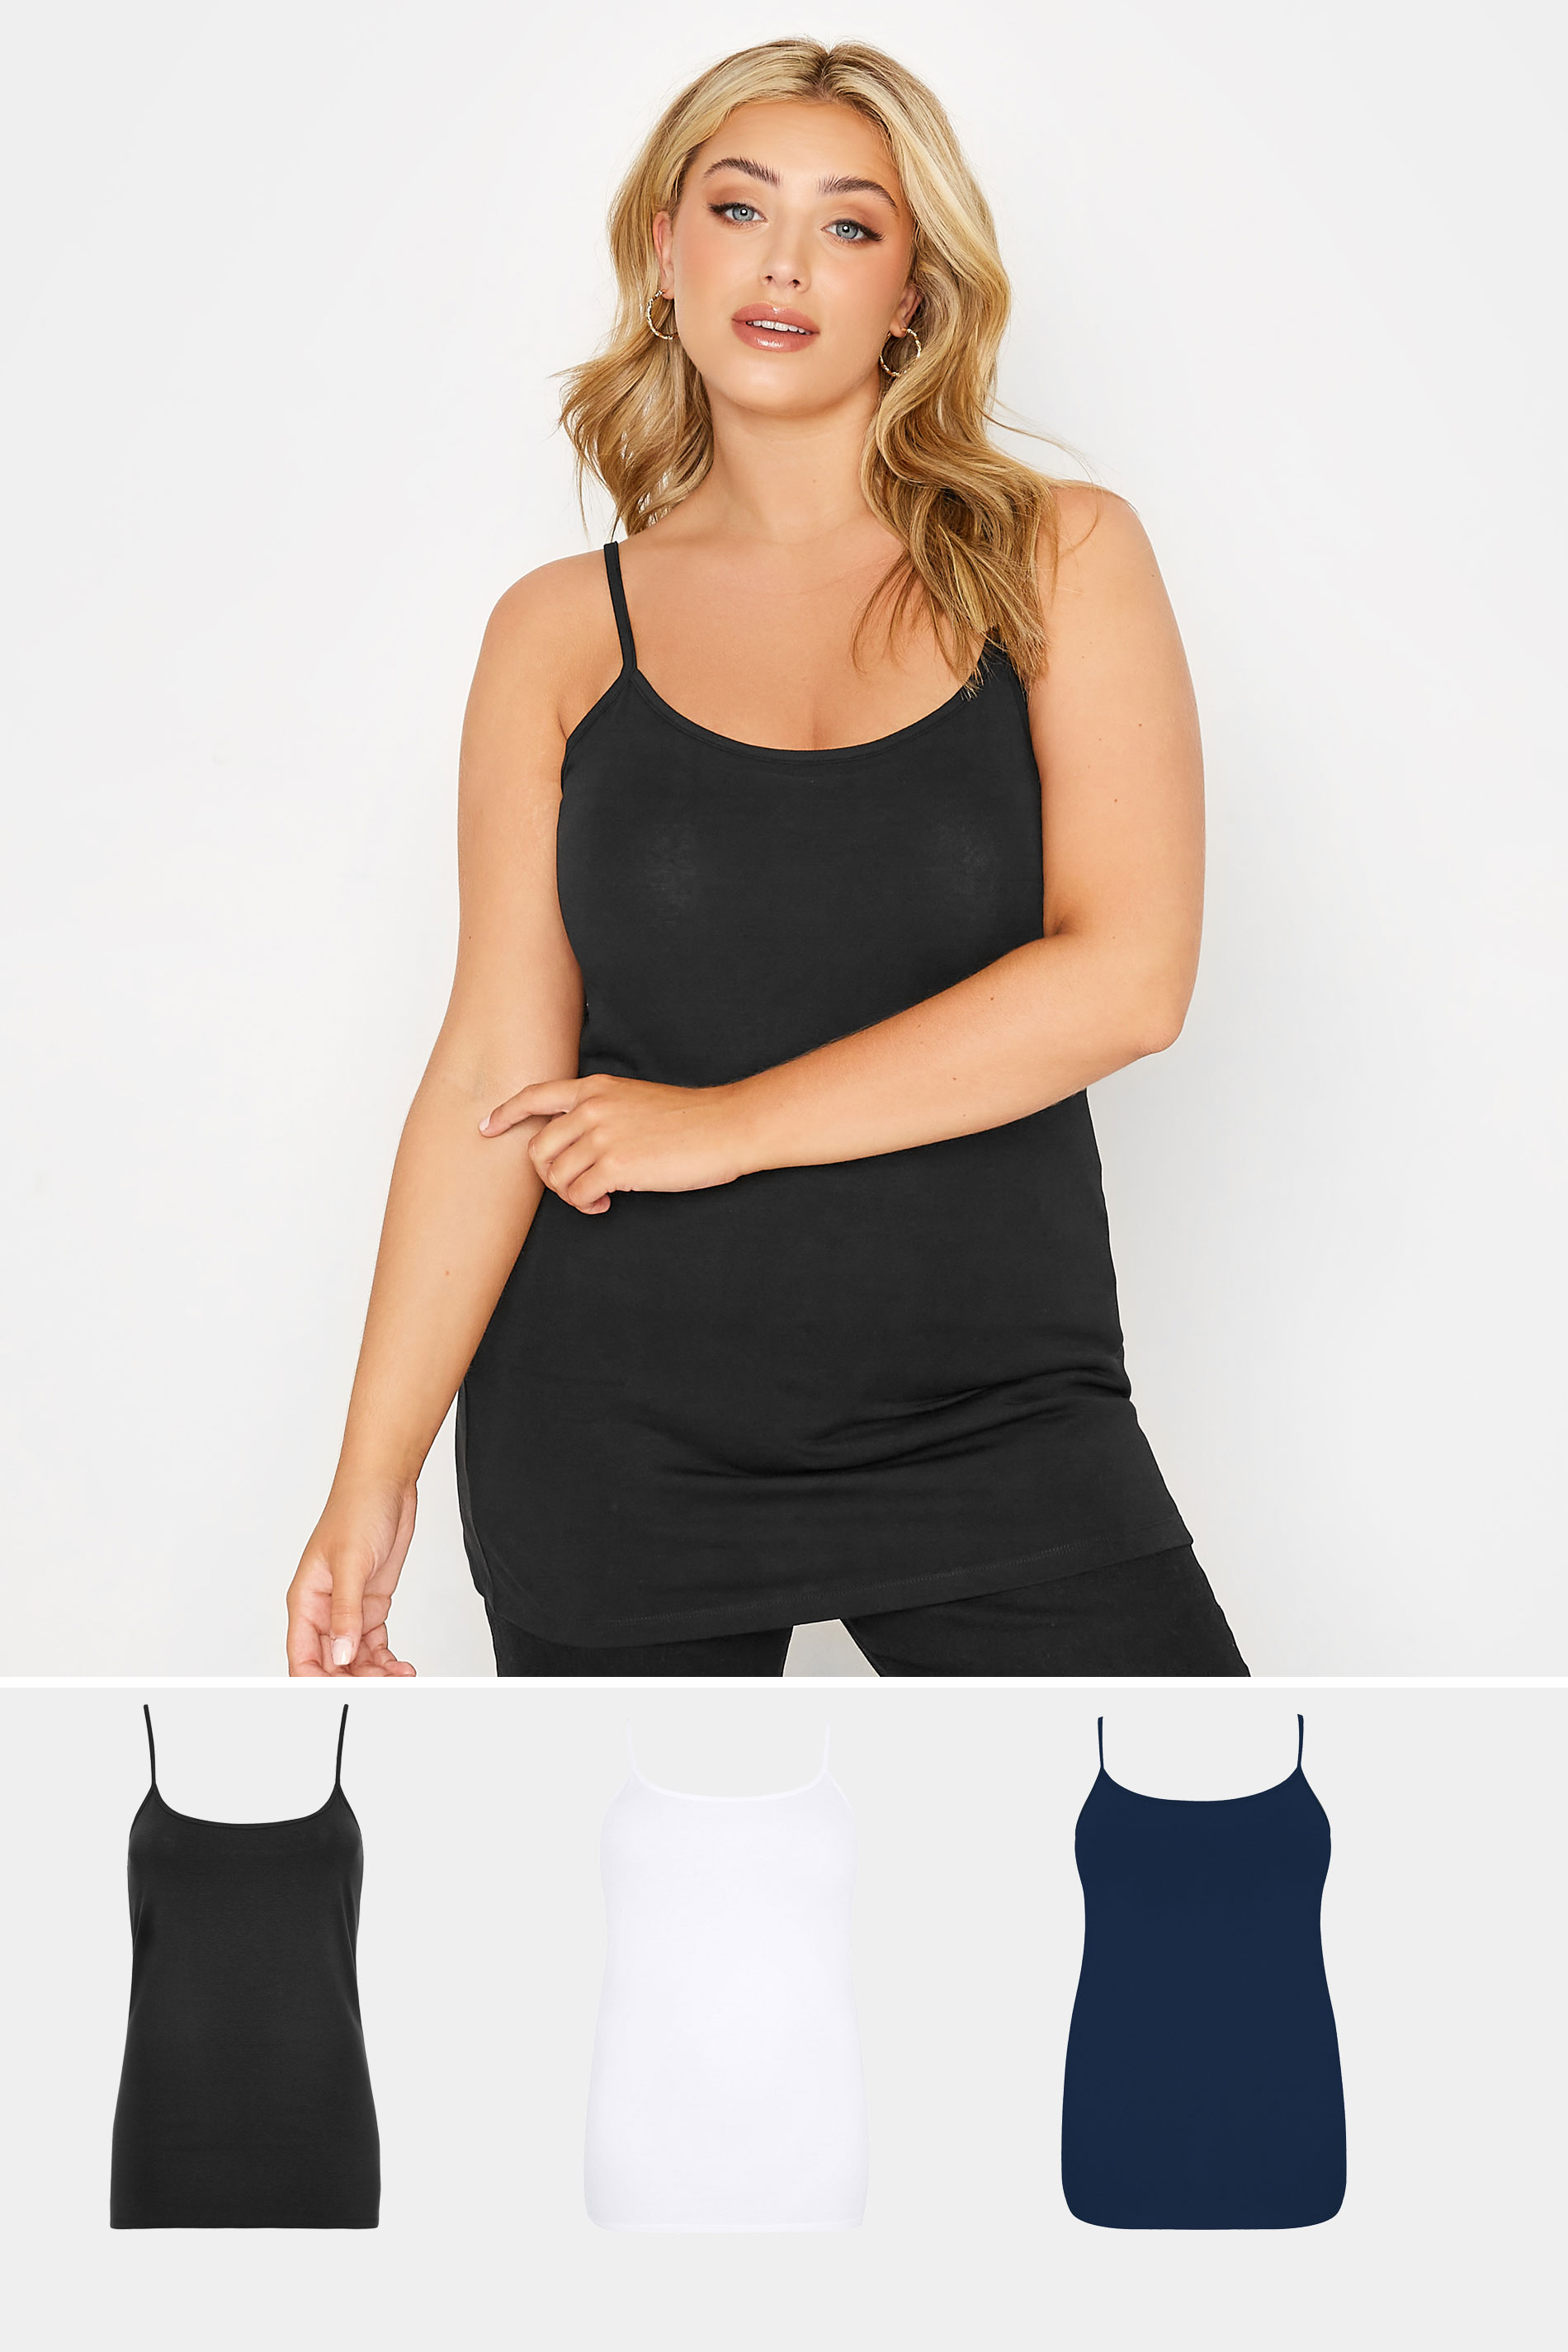  3 PACK Plus Size Black & Navy Blue Cami Tops | Yours Clothing  1